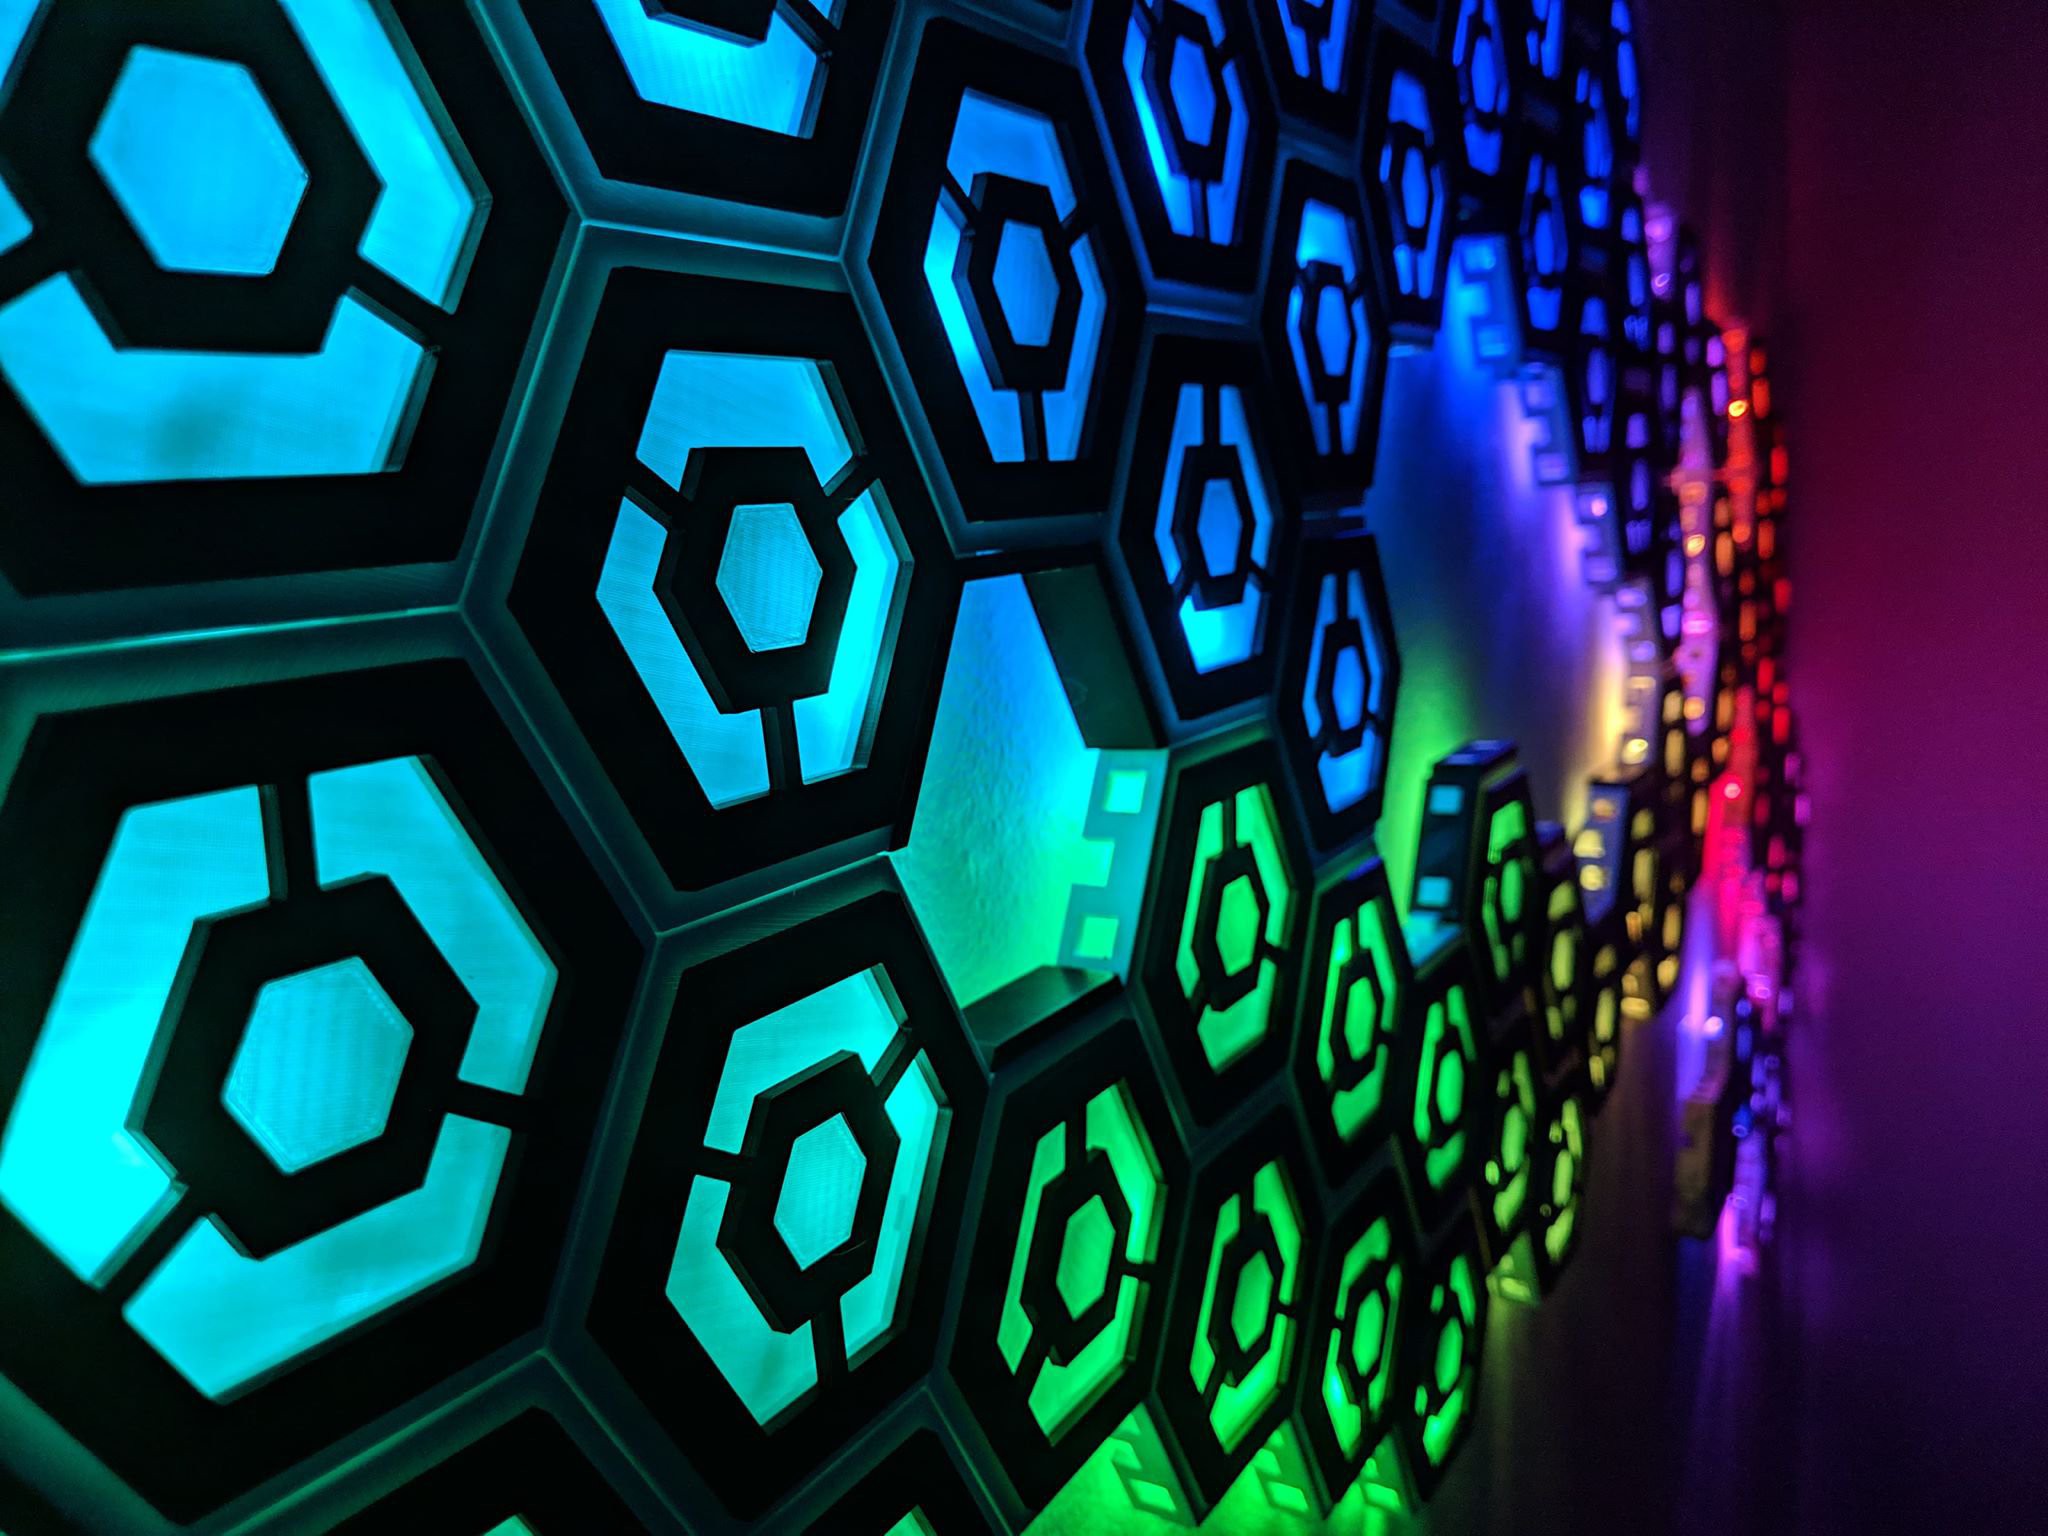 My custom wall art made with multiple ws2812b strands chained together and placed inside custom-built hexagon shells.